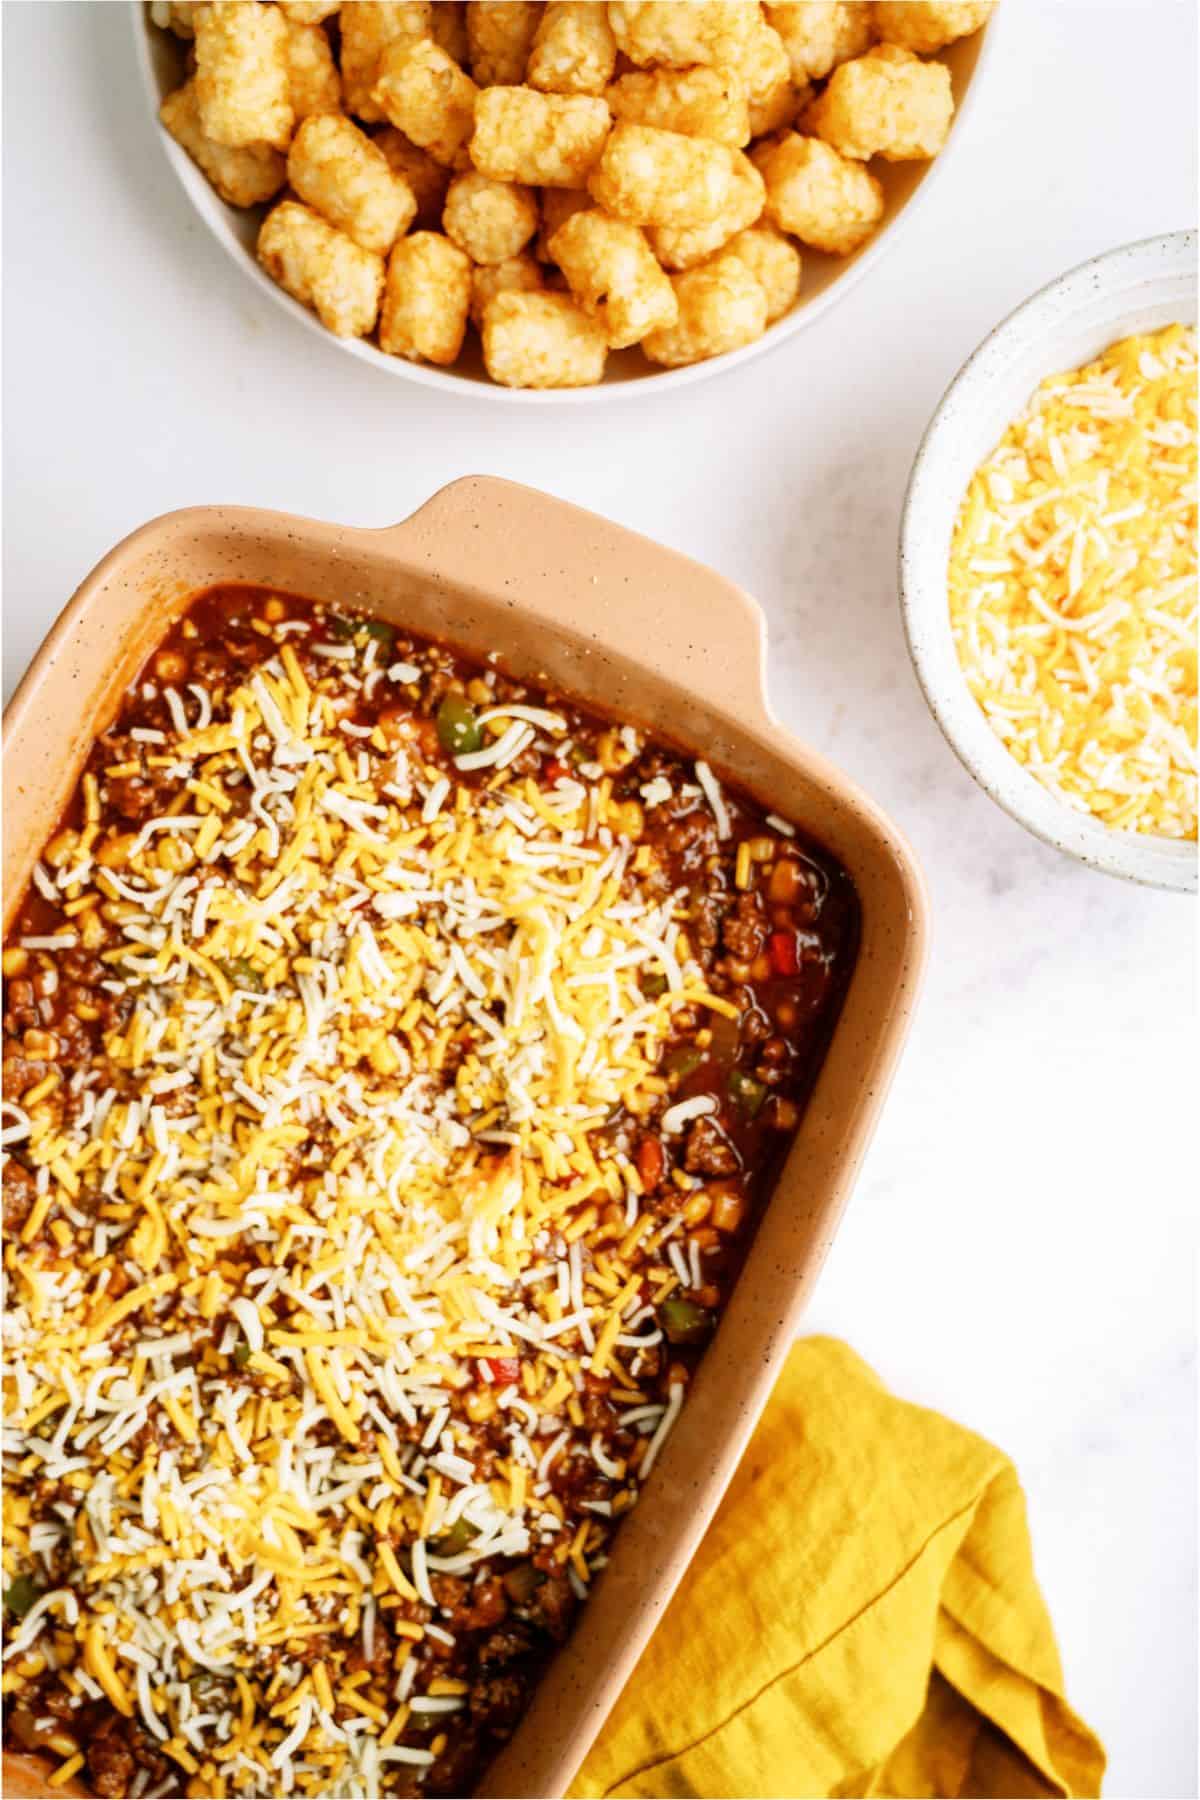 Shredded cheese on top of ground beef mixture in casserole dish